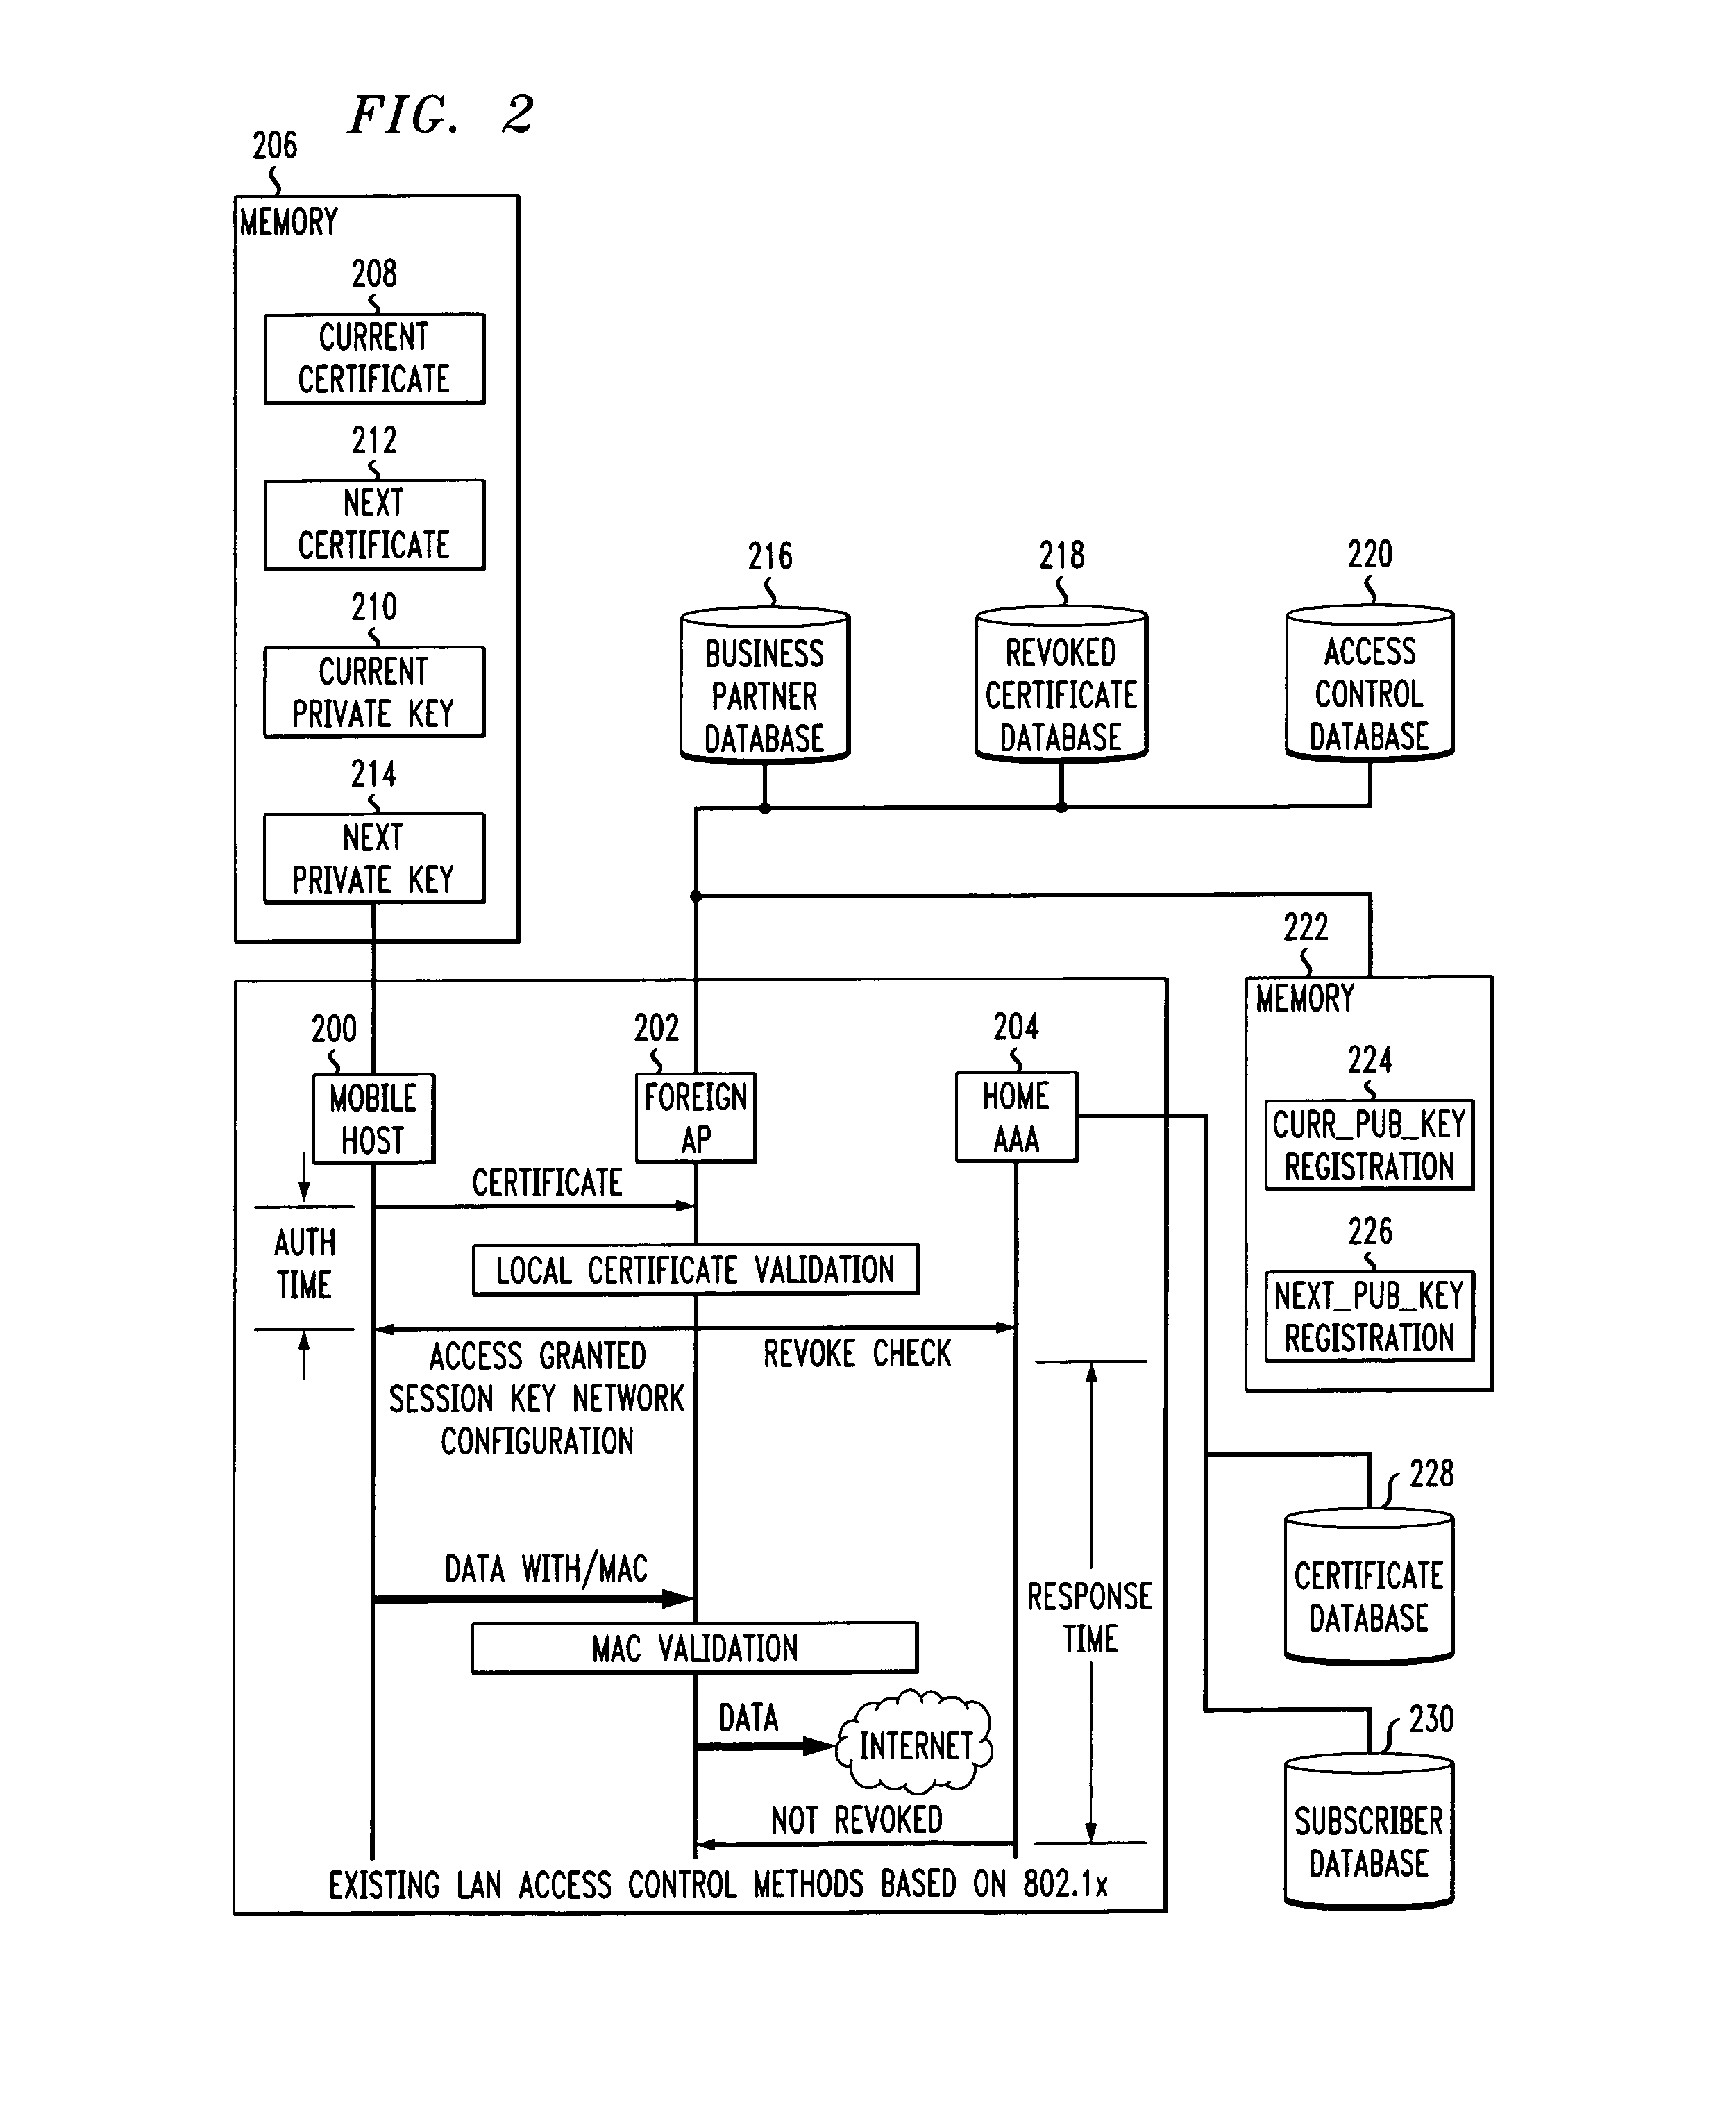 Fast authentication and access control system for mobile networking